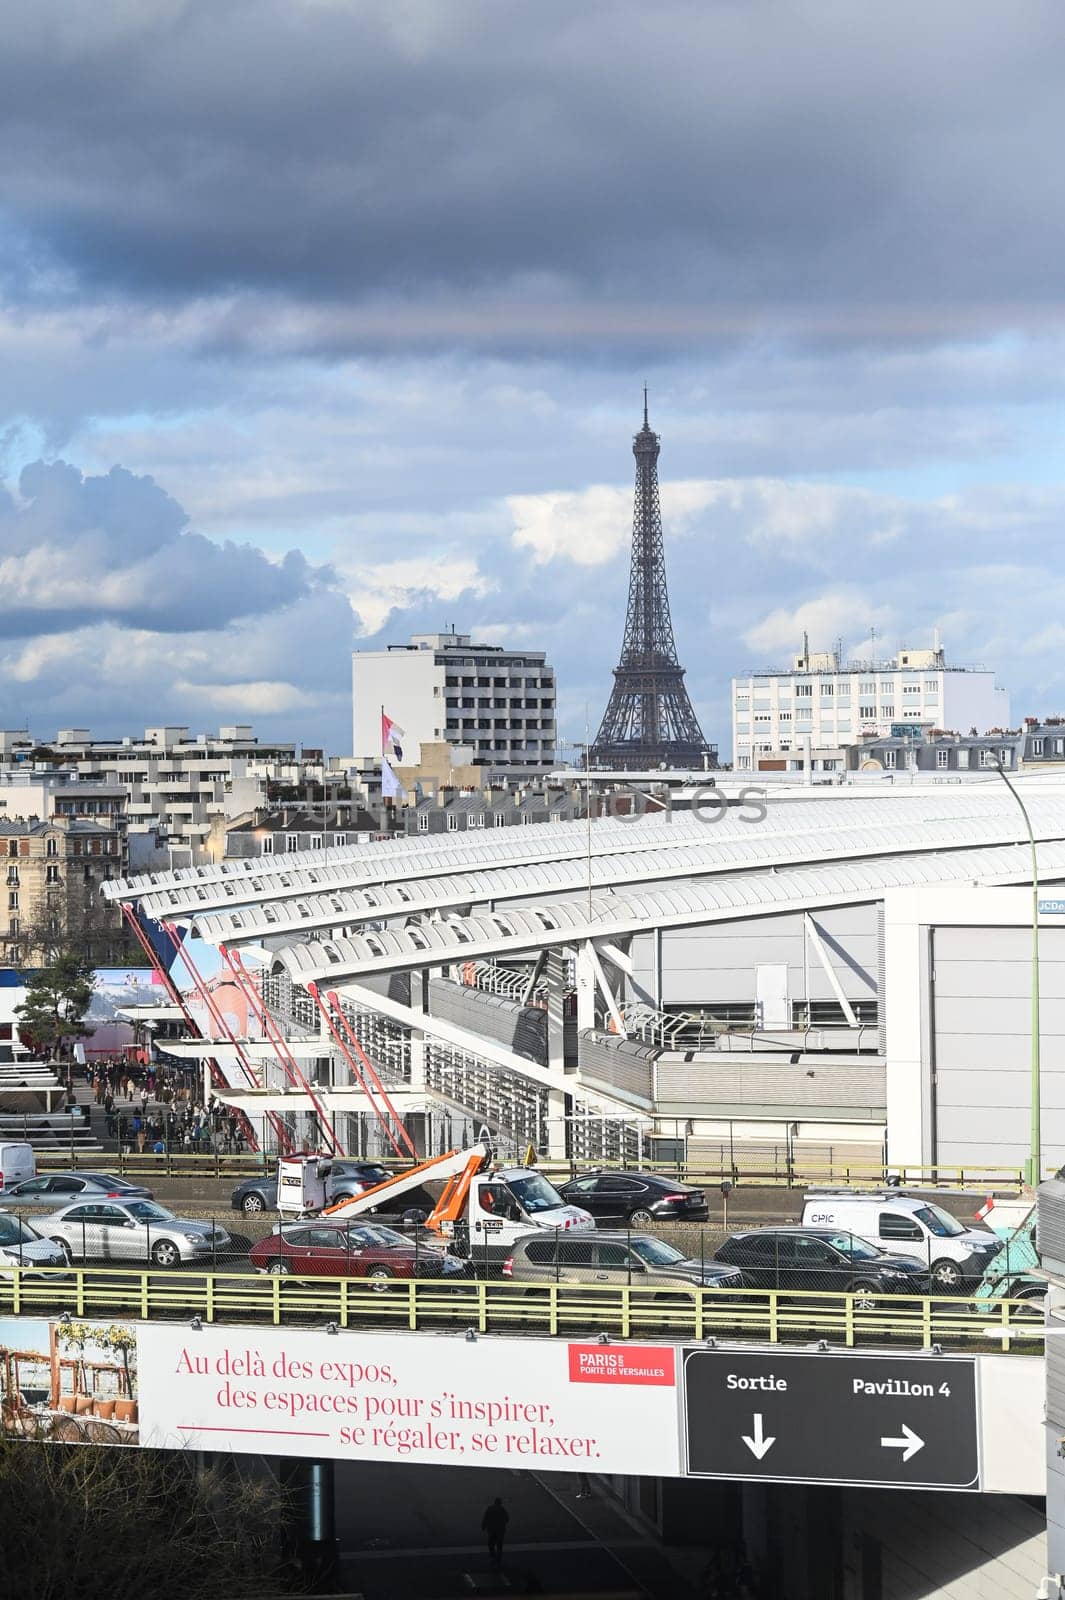 View of the Eiffel Tower from the roofs of the buildings towards Porte de Versailles, High quality photo